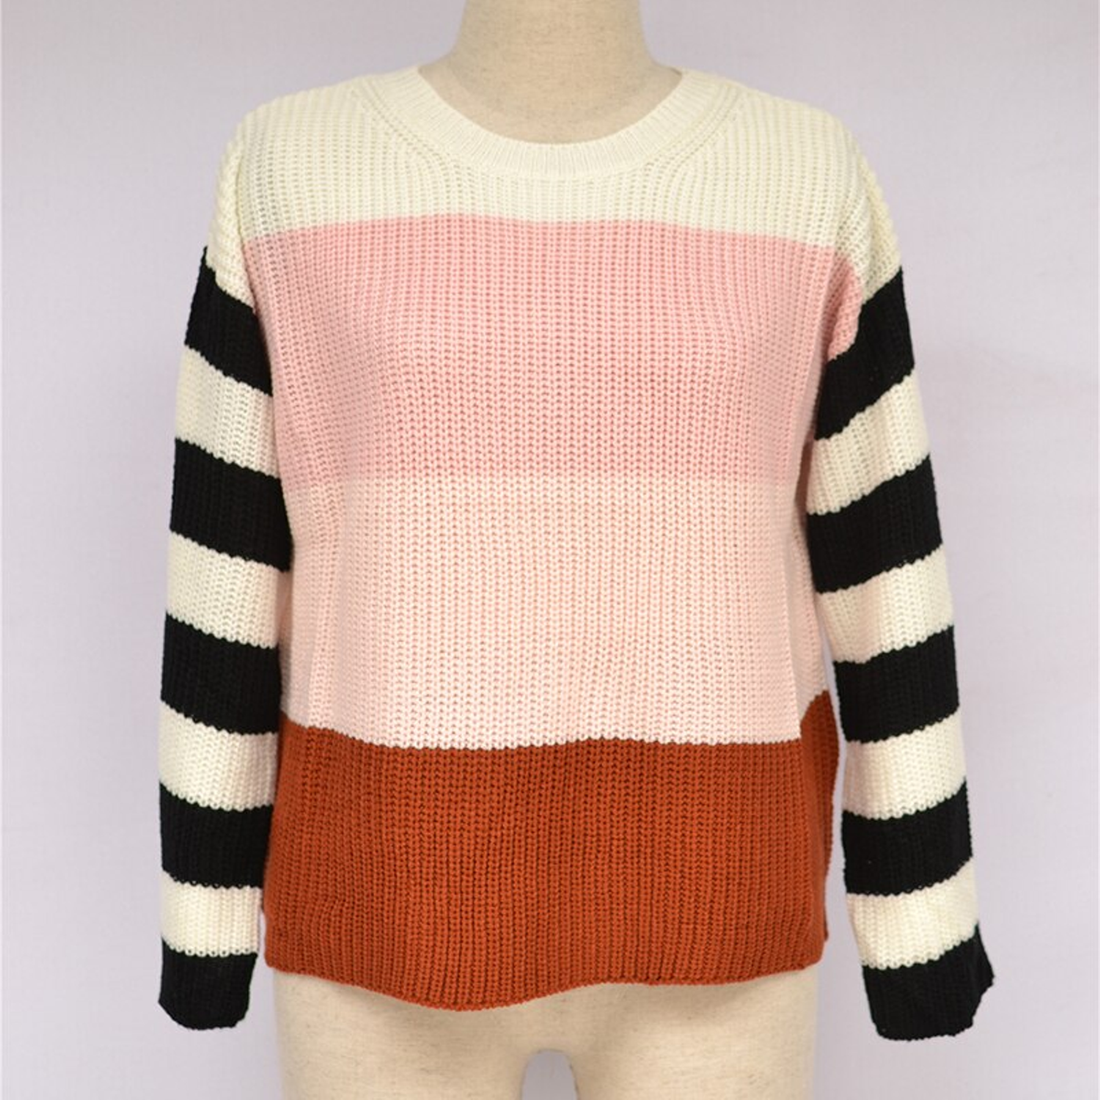 Women's Autumn/Winter Casual Knitted Sweater